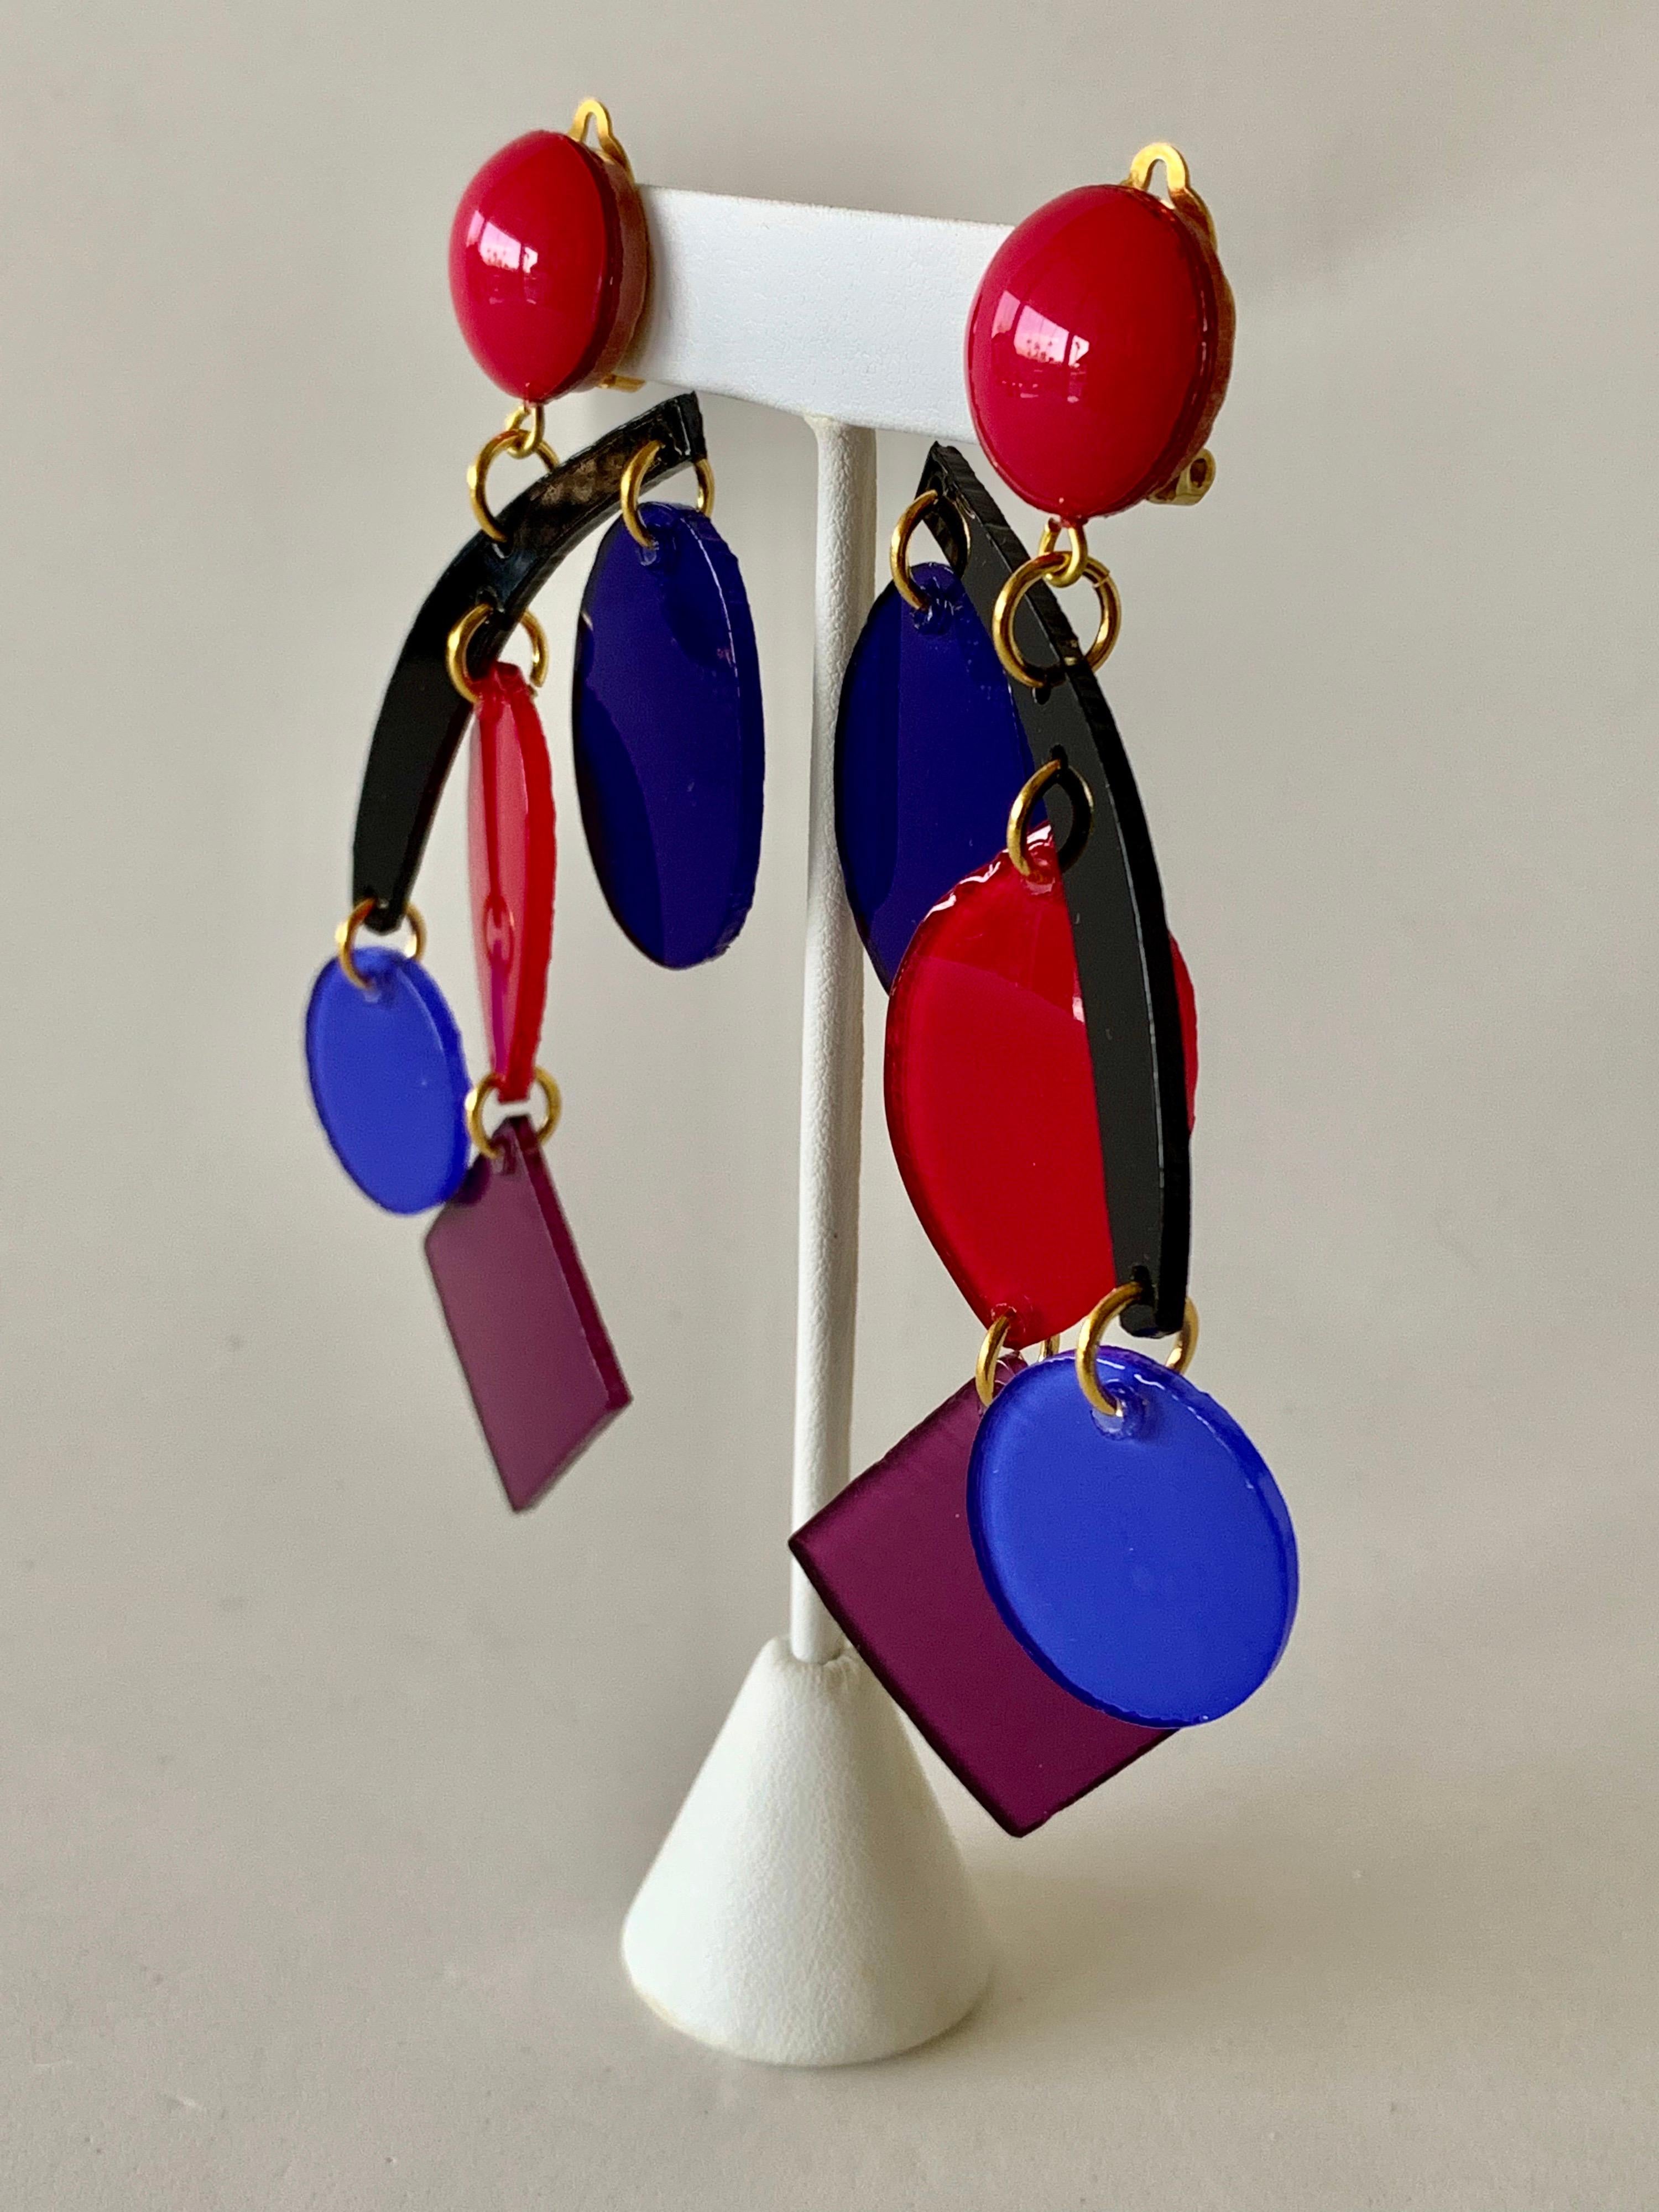 Colorful Modern Mobile Sculptural Statement Earrings 2